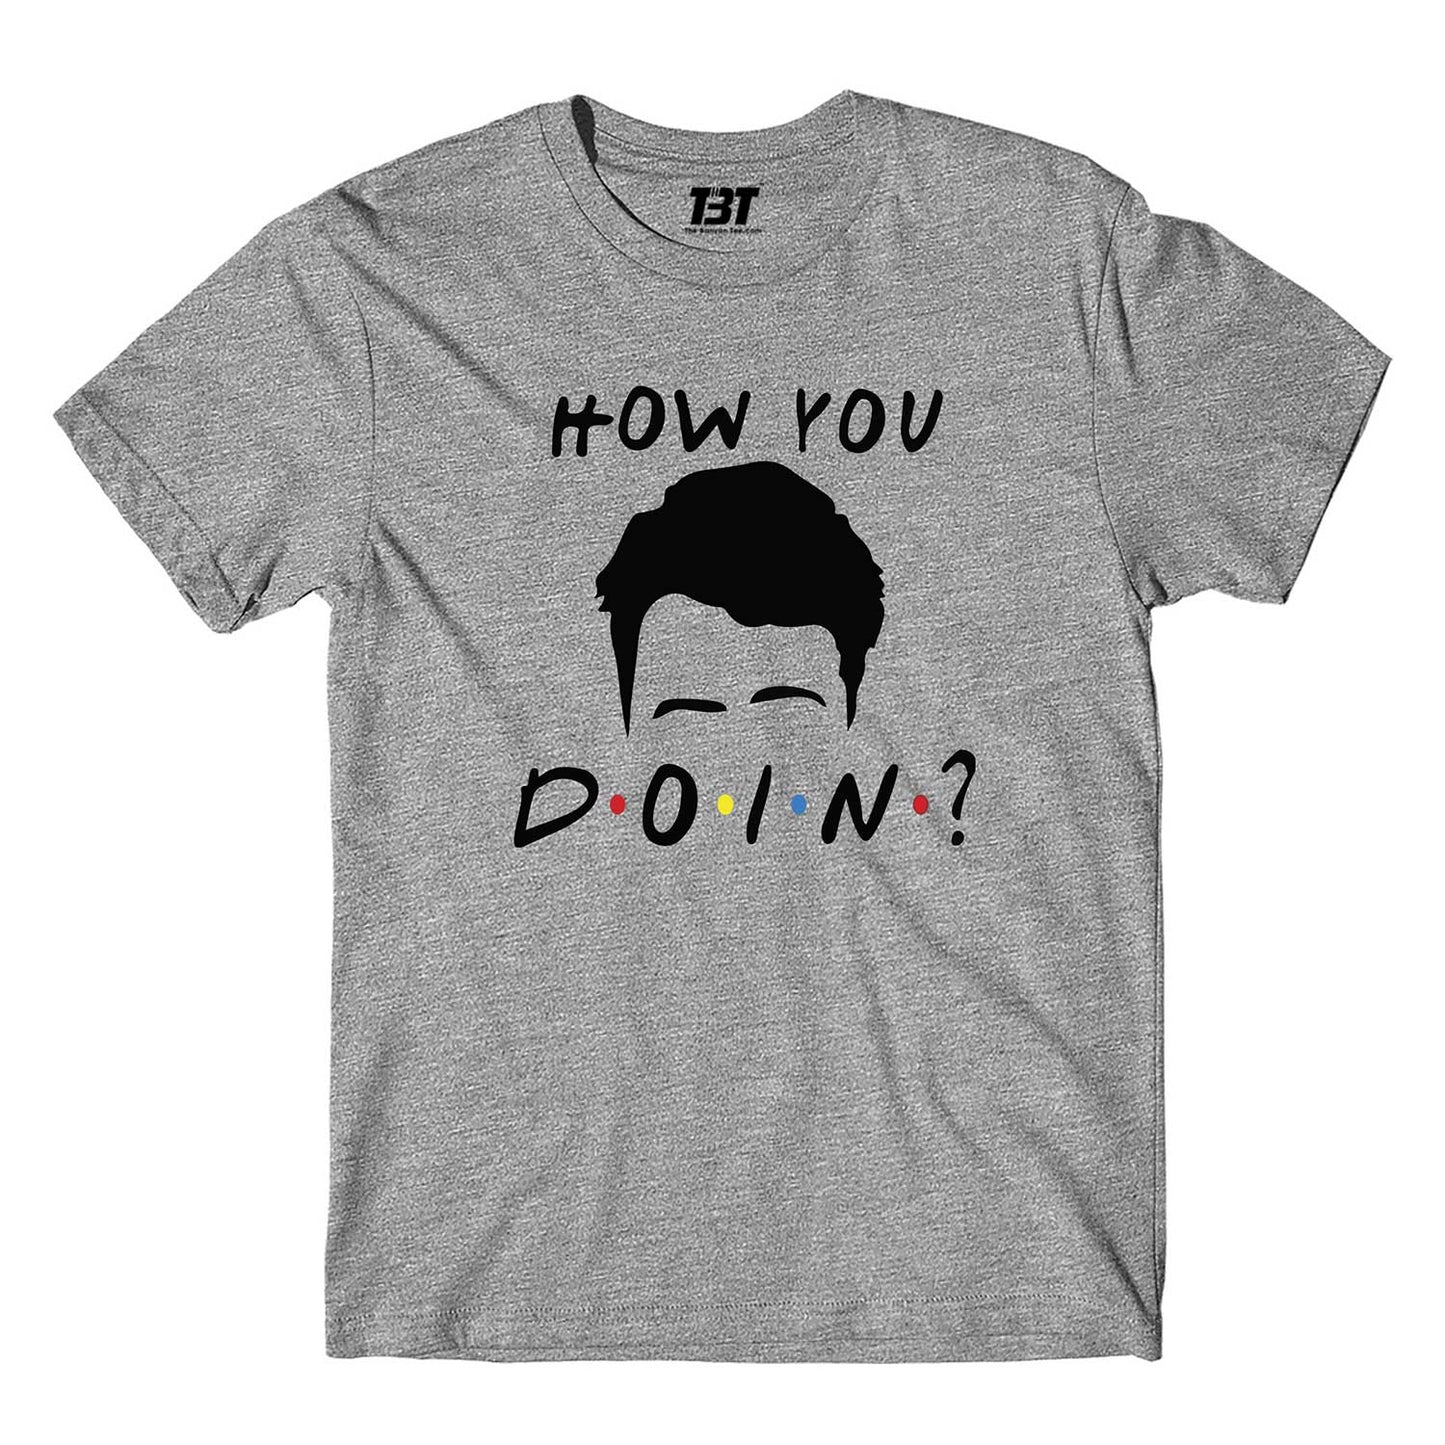 Friends T-shirt - How You Doin? by The Banyan Tee TBT